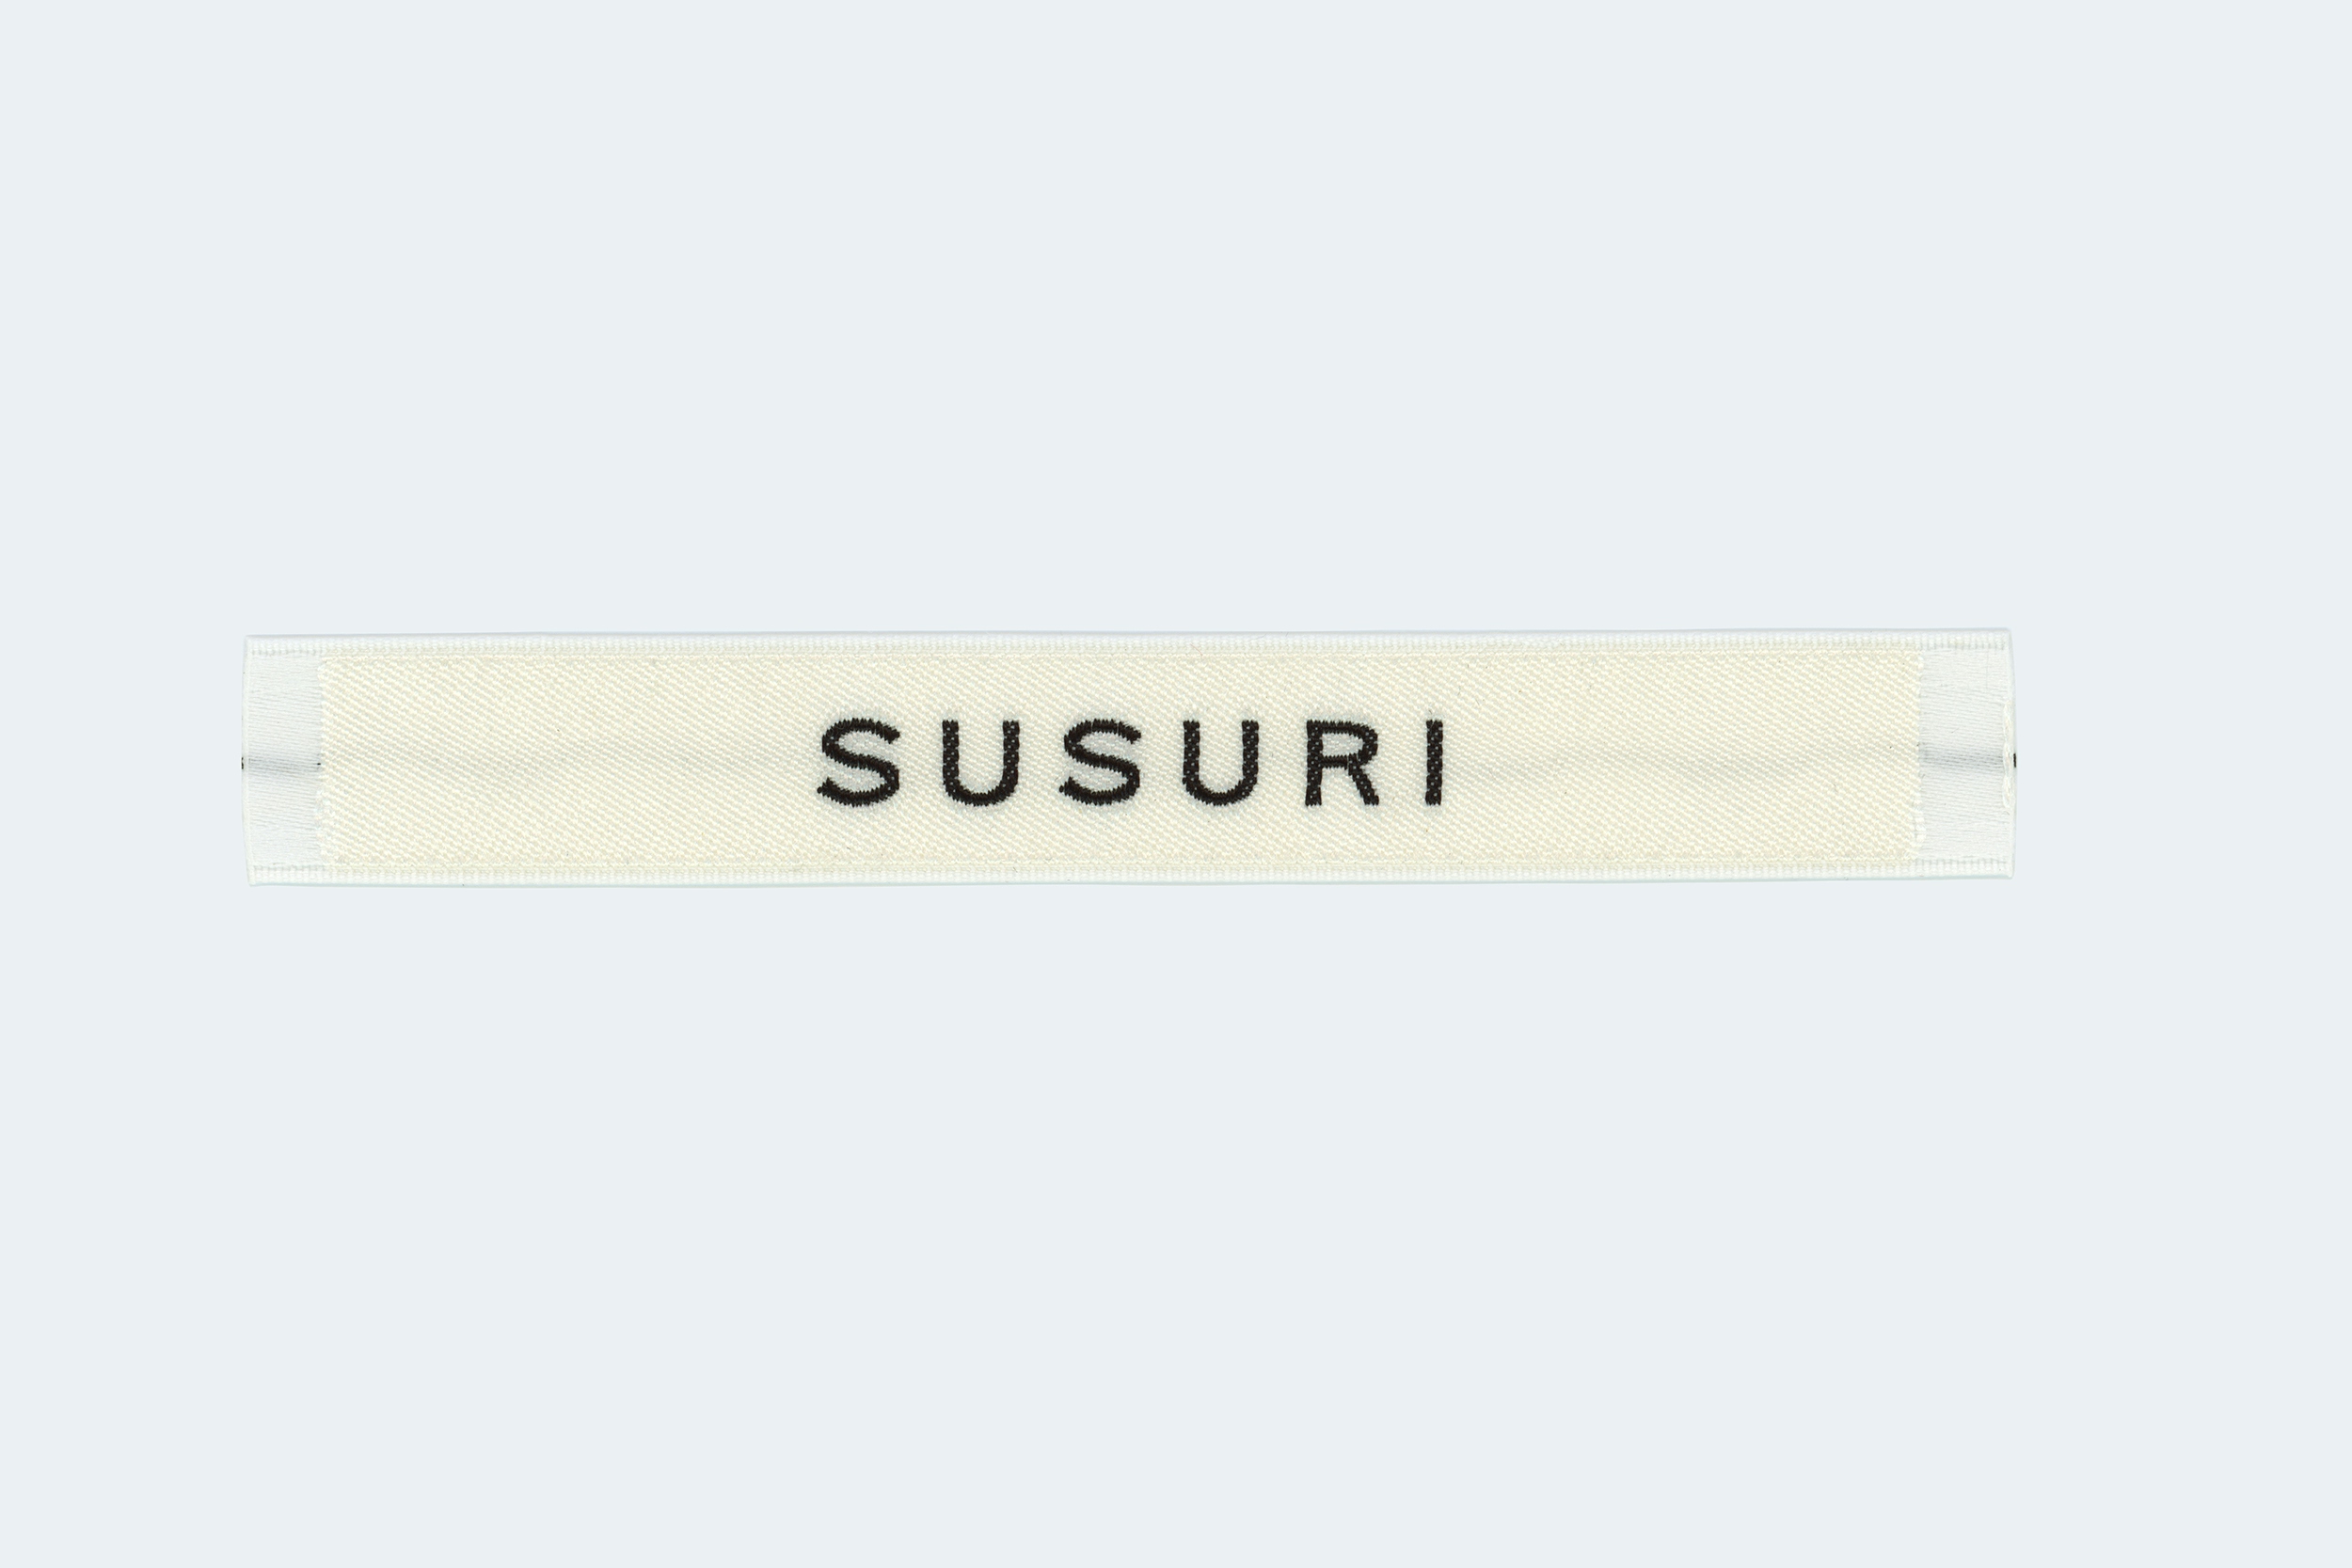 scanned cloth tag showing the SUSURI logo